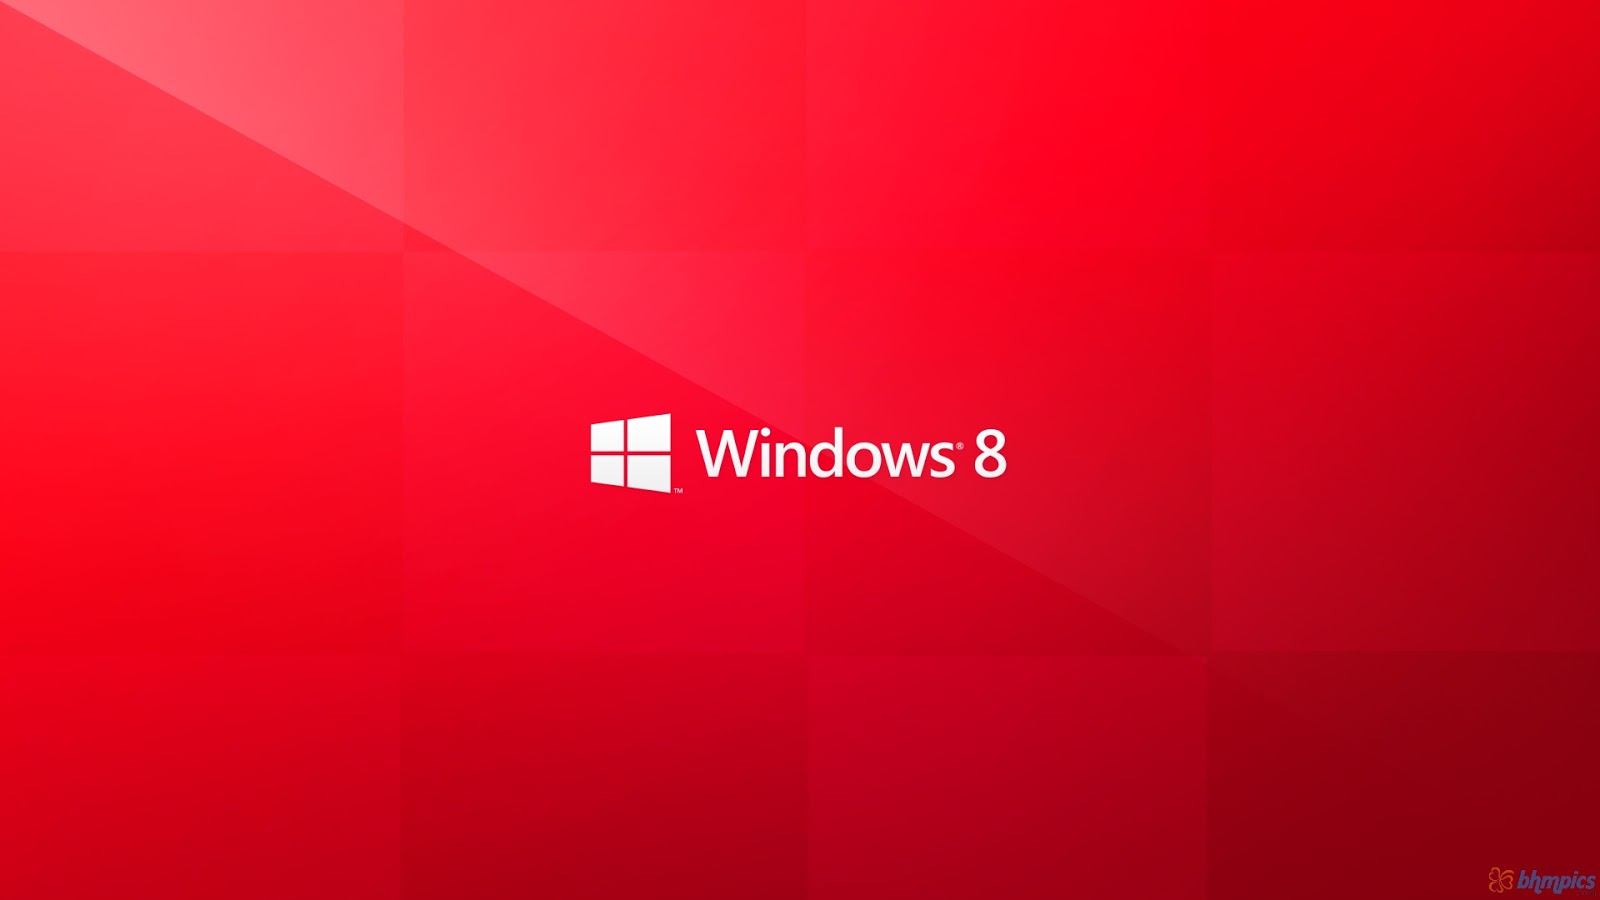 Free Best Pictures: Windows 8 Metro Red Wallpapers - 1920x1080 HD Full Hd Wallpapers For Windows 8 1920x1080